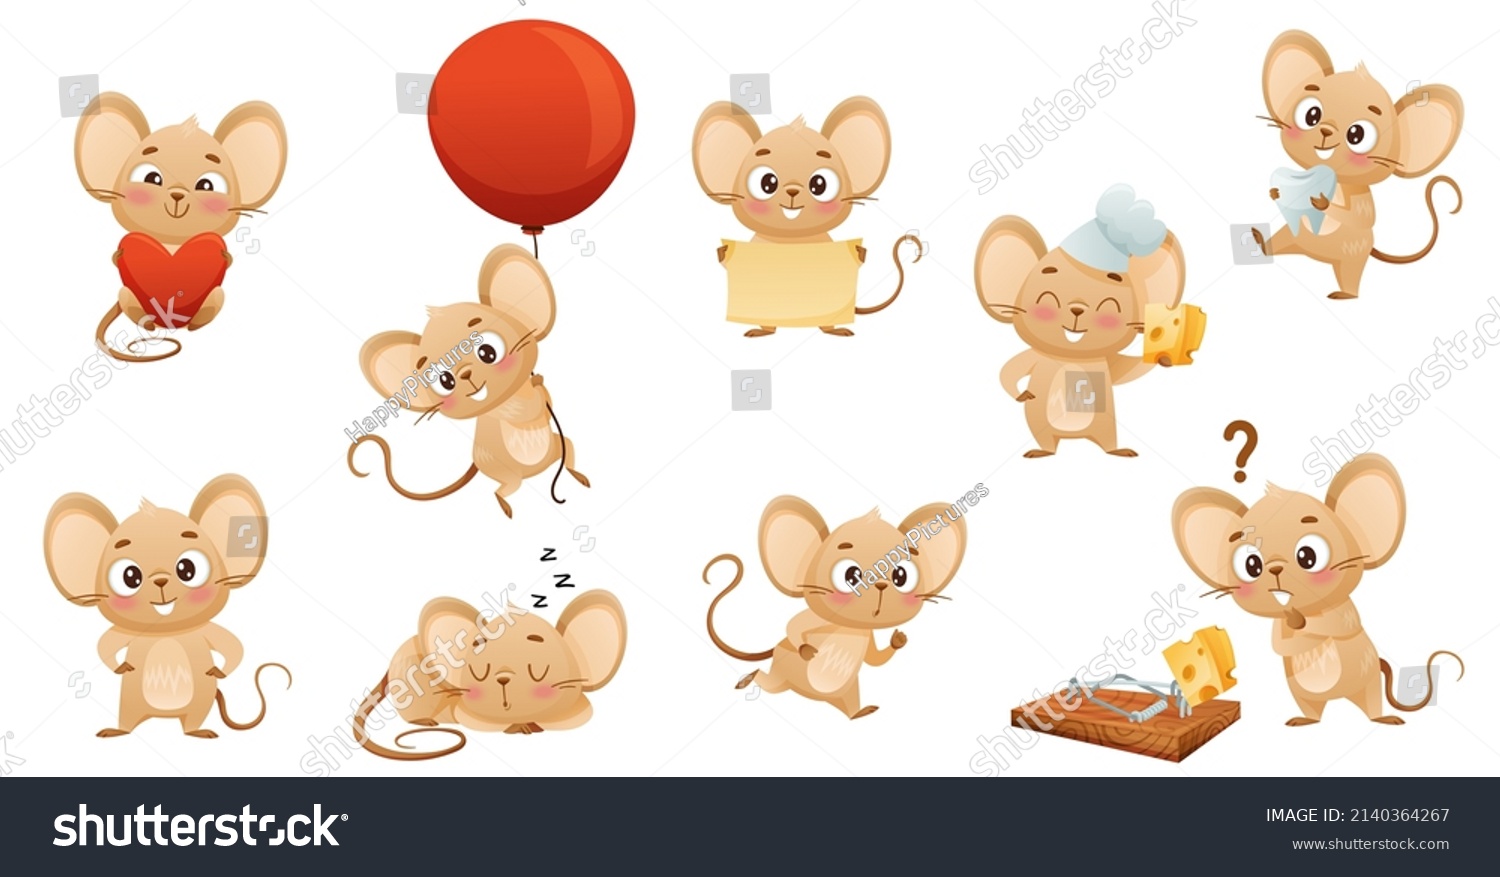 SVG of Cute little mouse doing various activities set. Funny brown baby animal character vector illustration svg